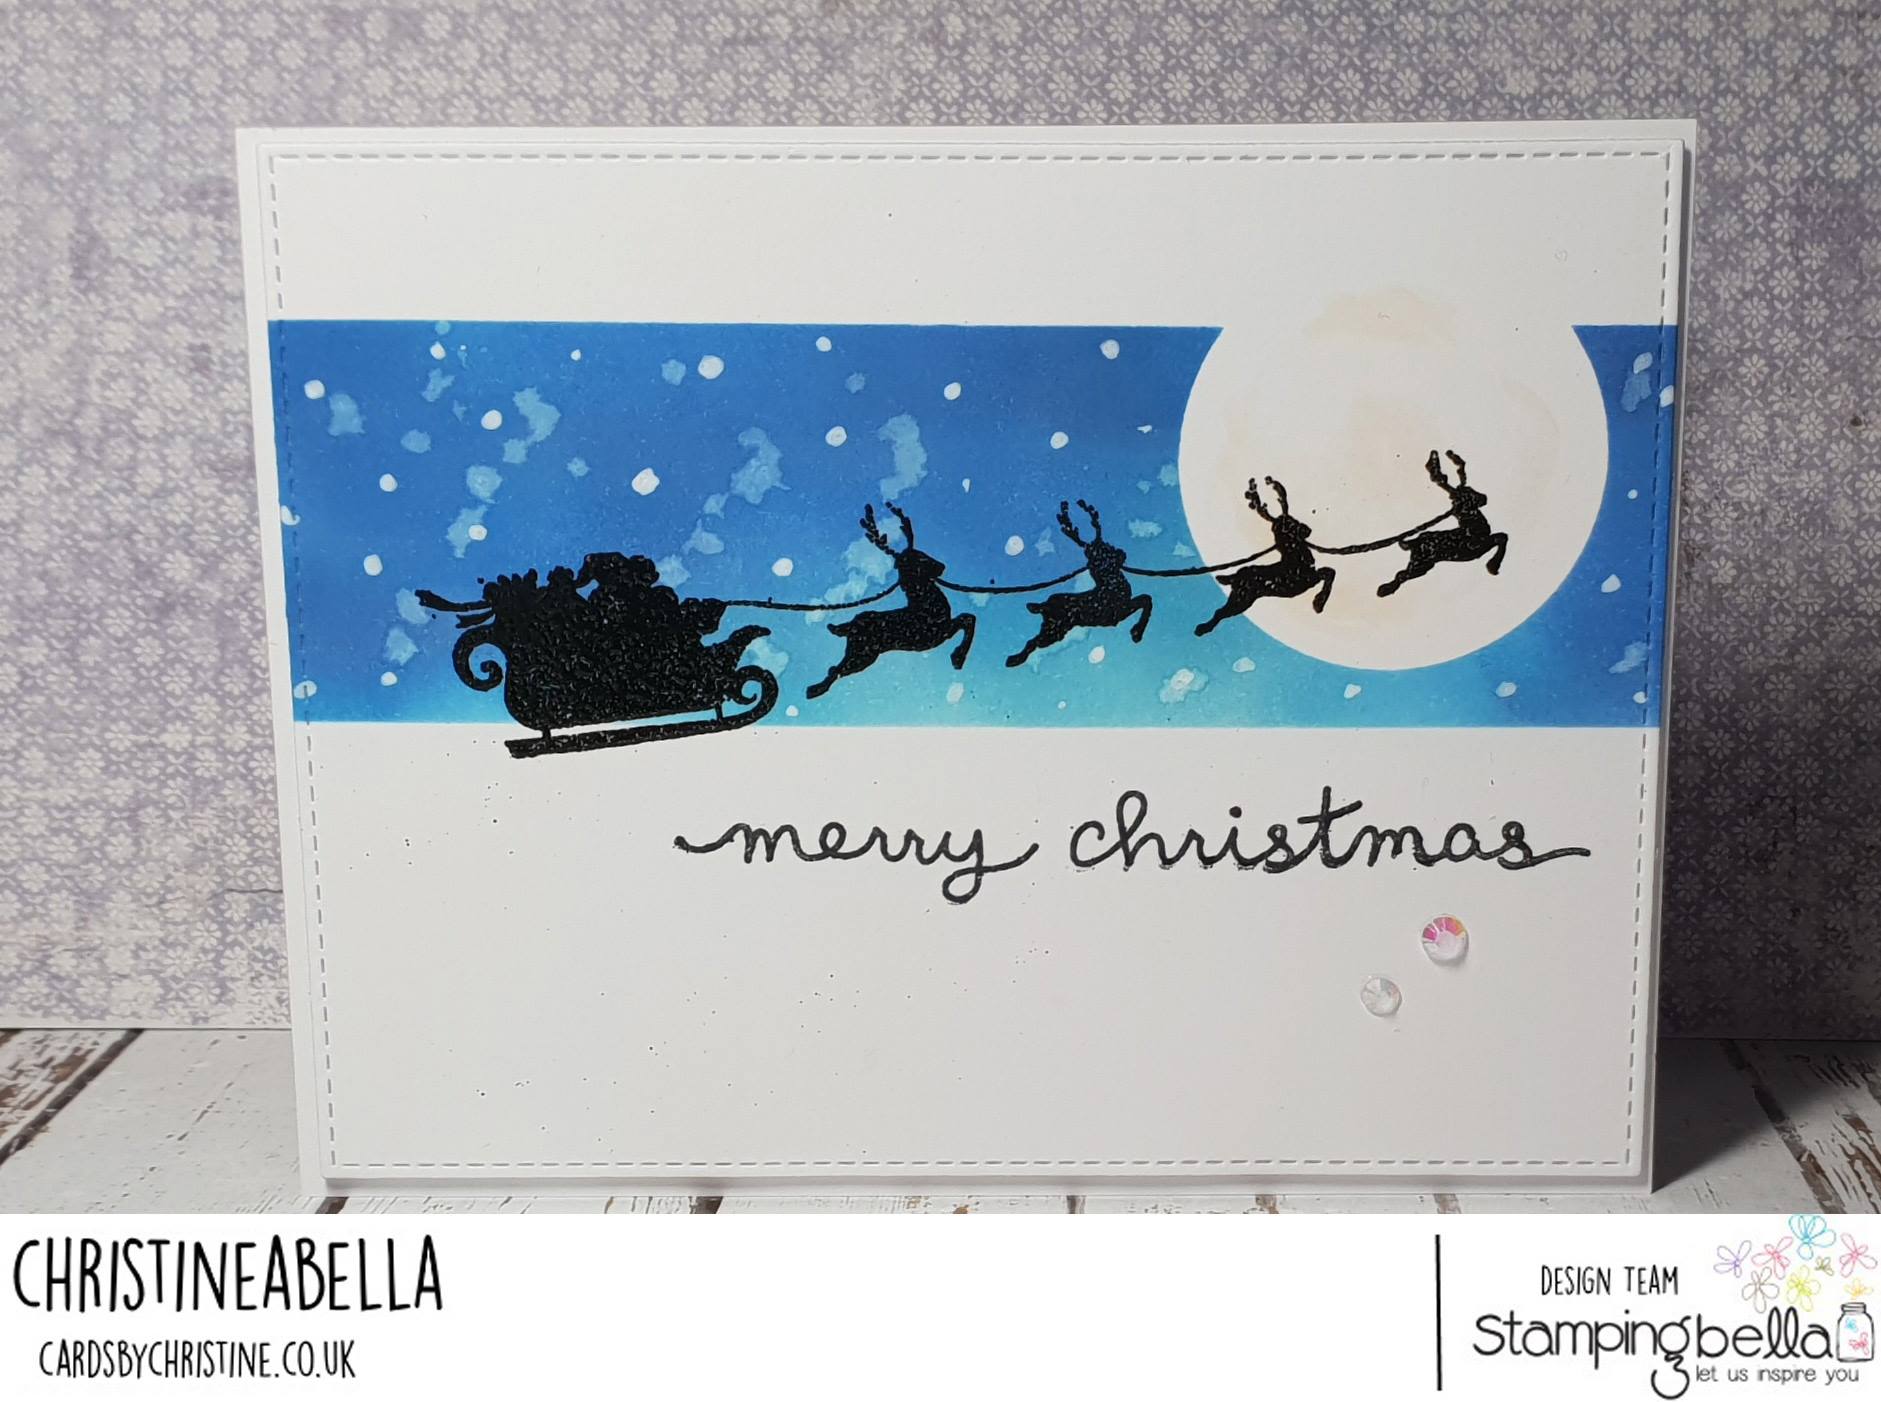 www.stampingbella.com.  RUBBER STAMP USED:  SANTA'S SLEIGH SILHOUETTE.  Card by Christine Levison